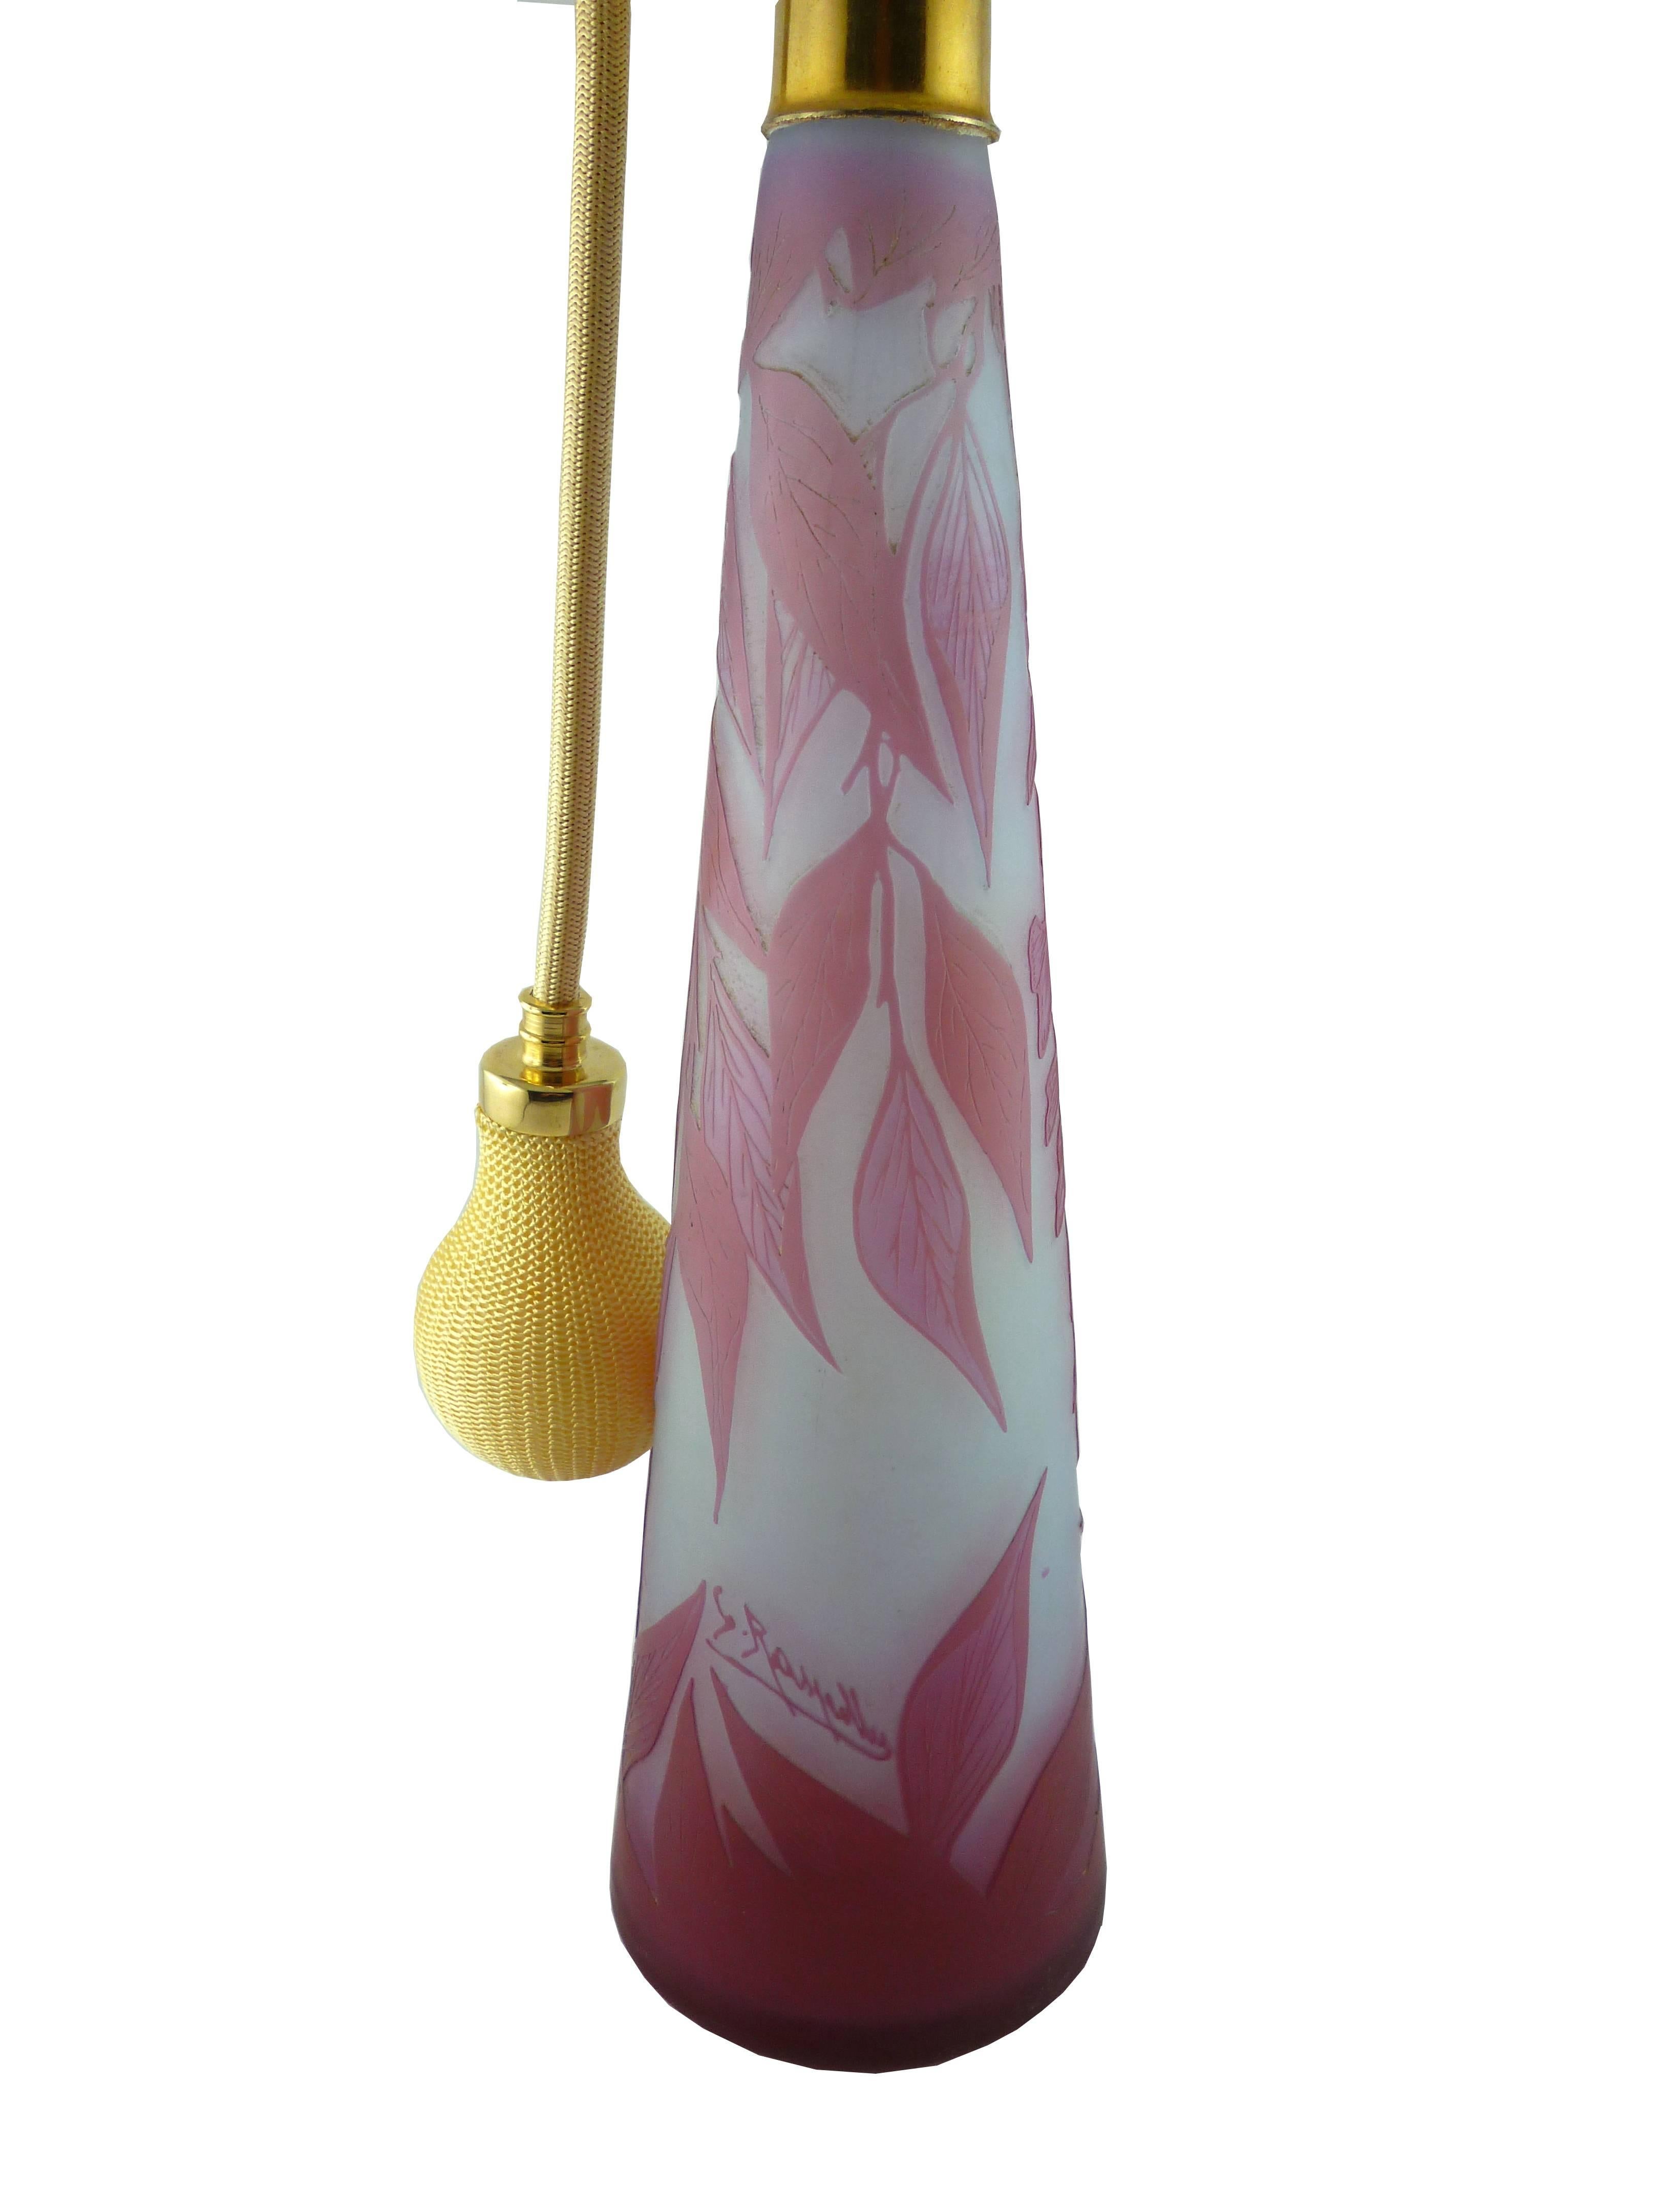 GEORGES RASPILLER huge perfume atomizer featuring a great acid etched wisteria pattern.

Circa 1910.

GEORGES RASPILLER was a master glass artist listed in the book 